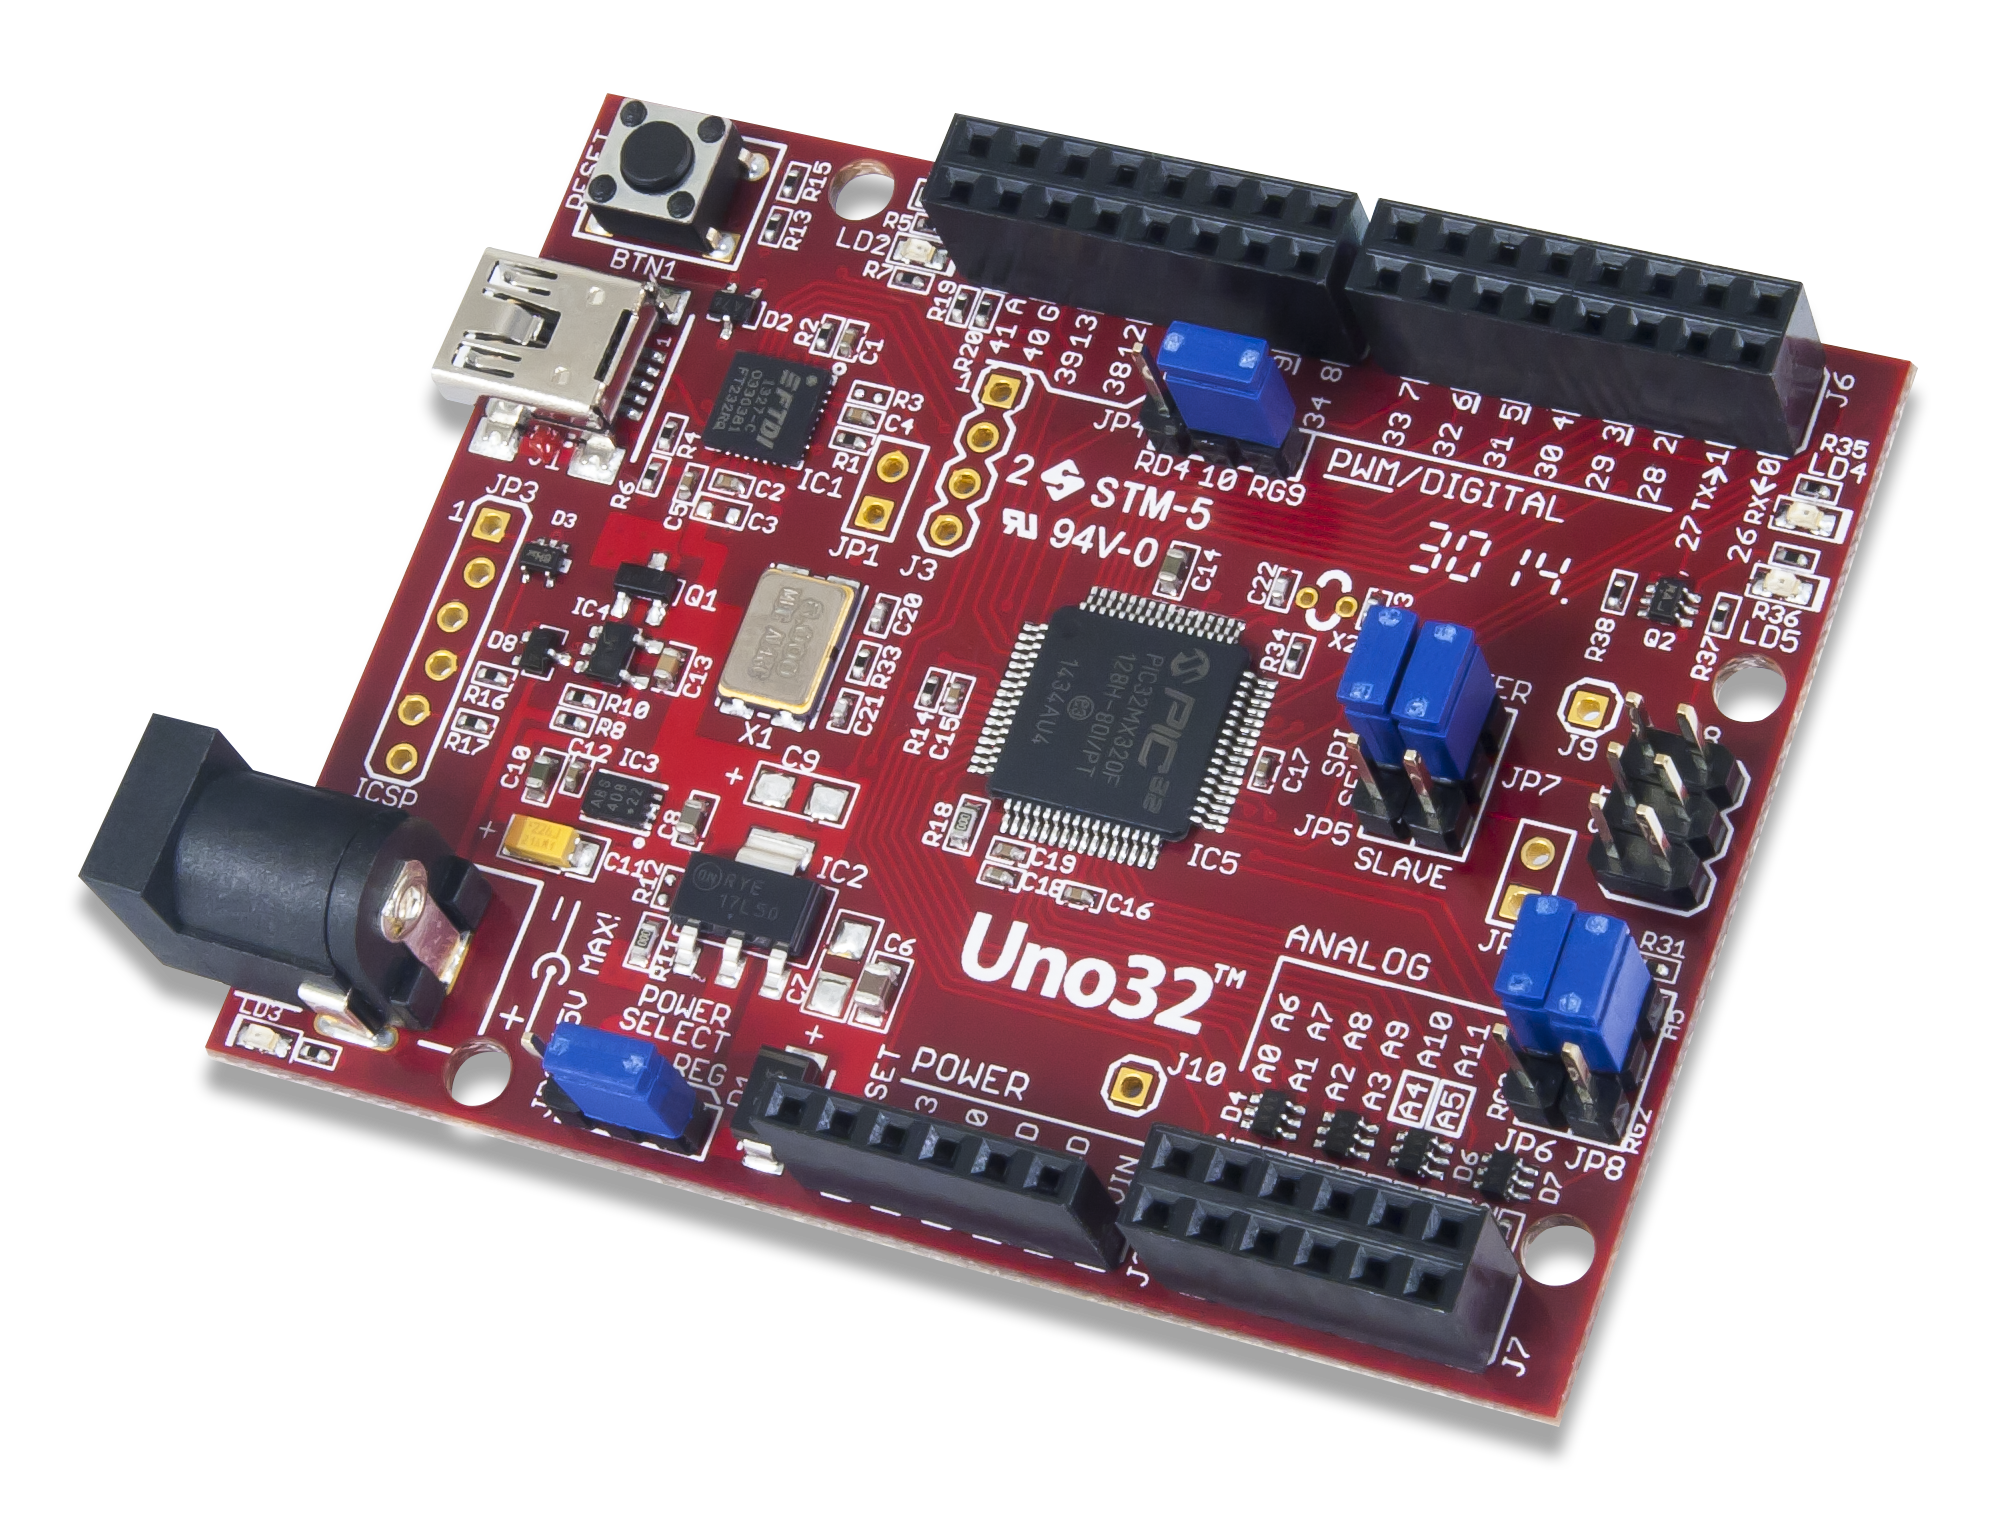 chipkit_uno32-obl2-2000.png